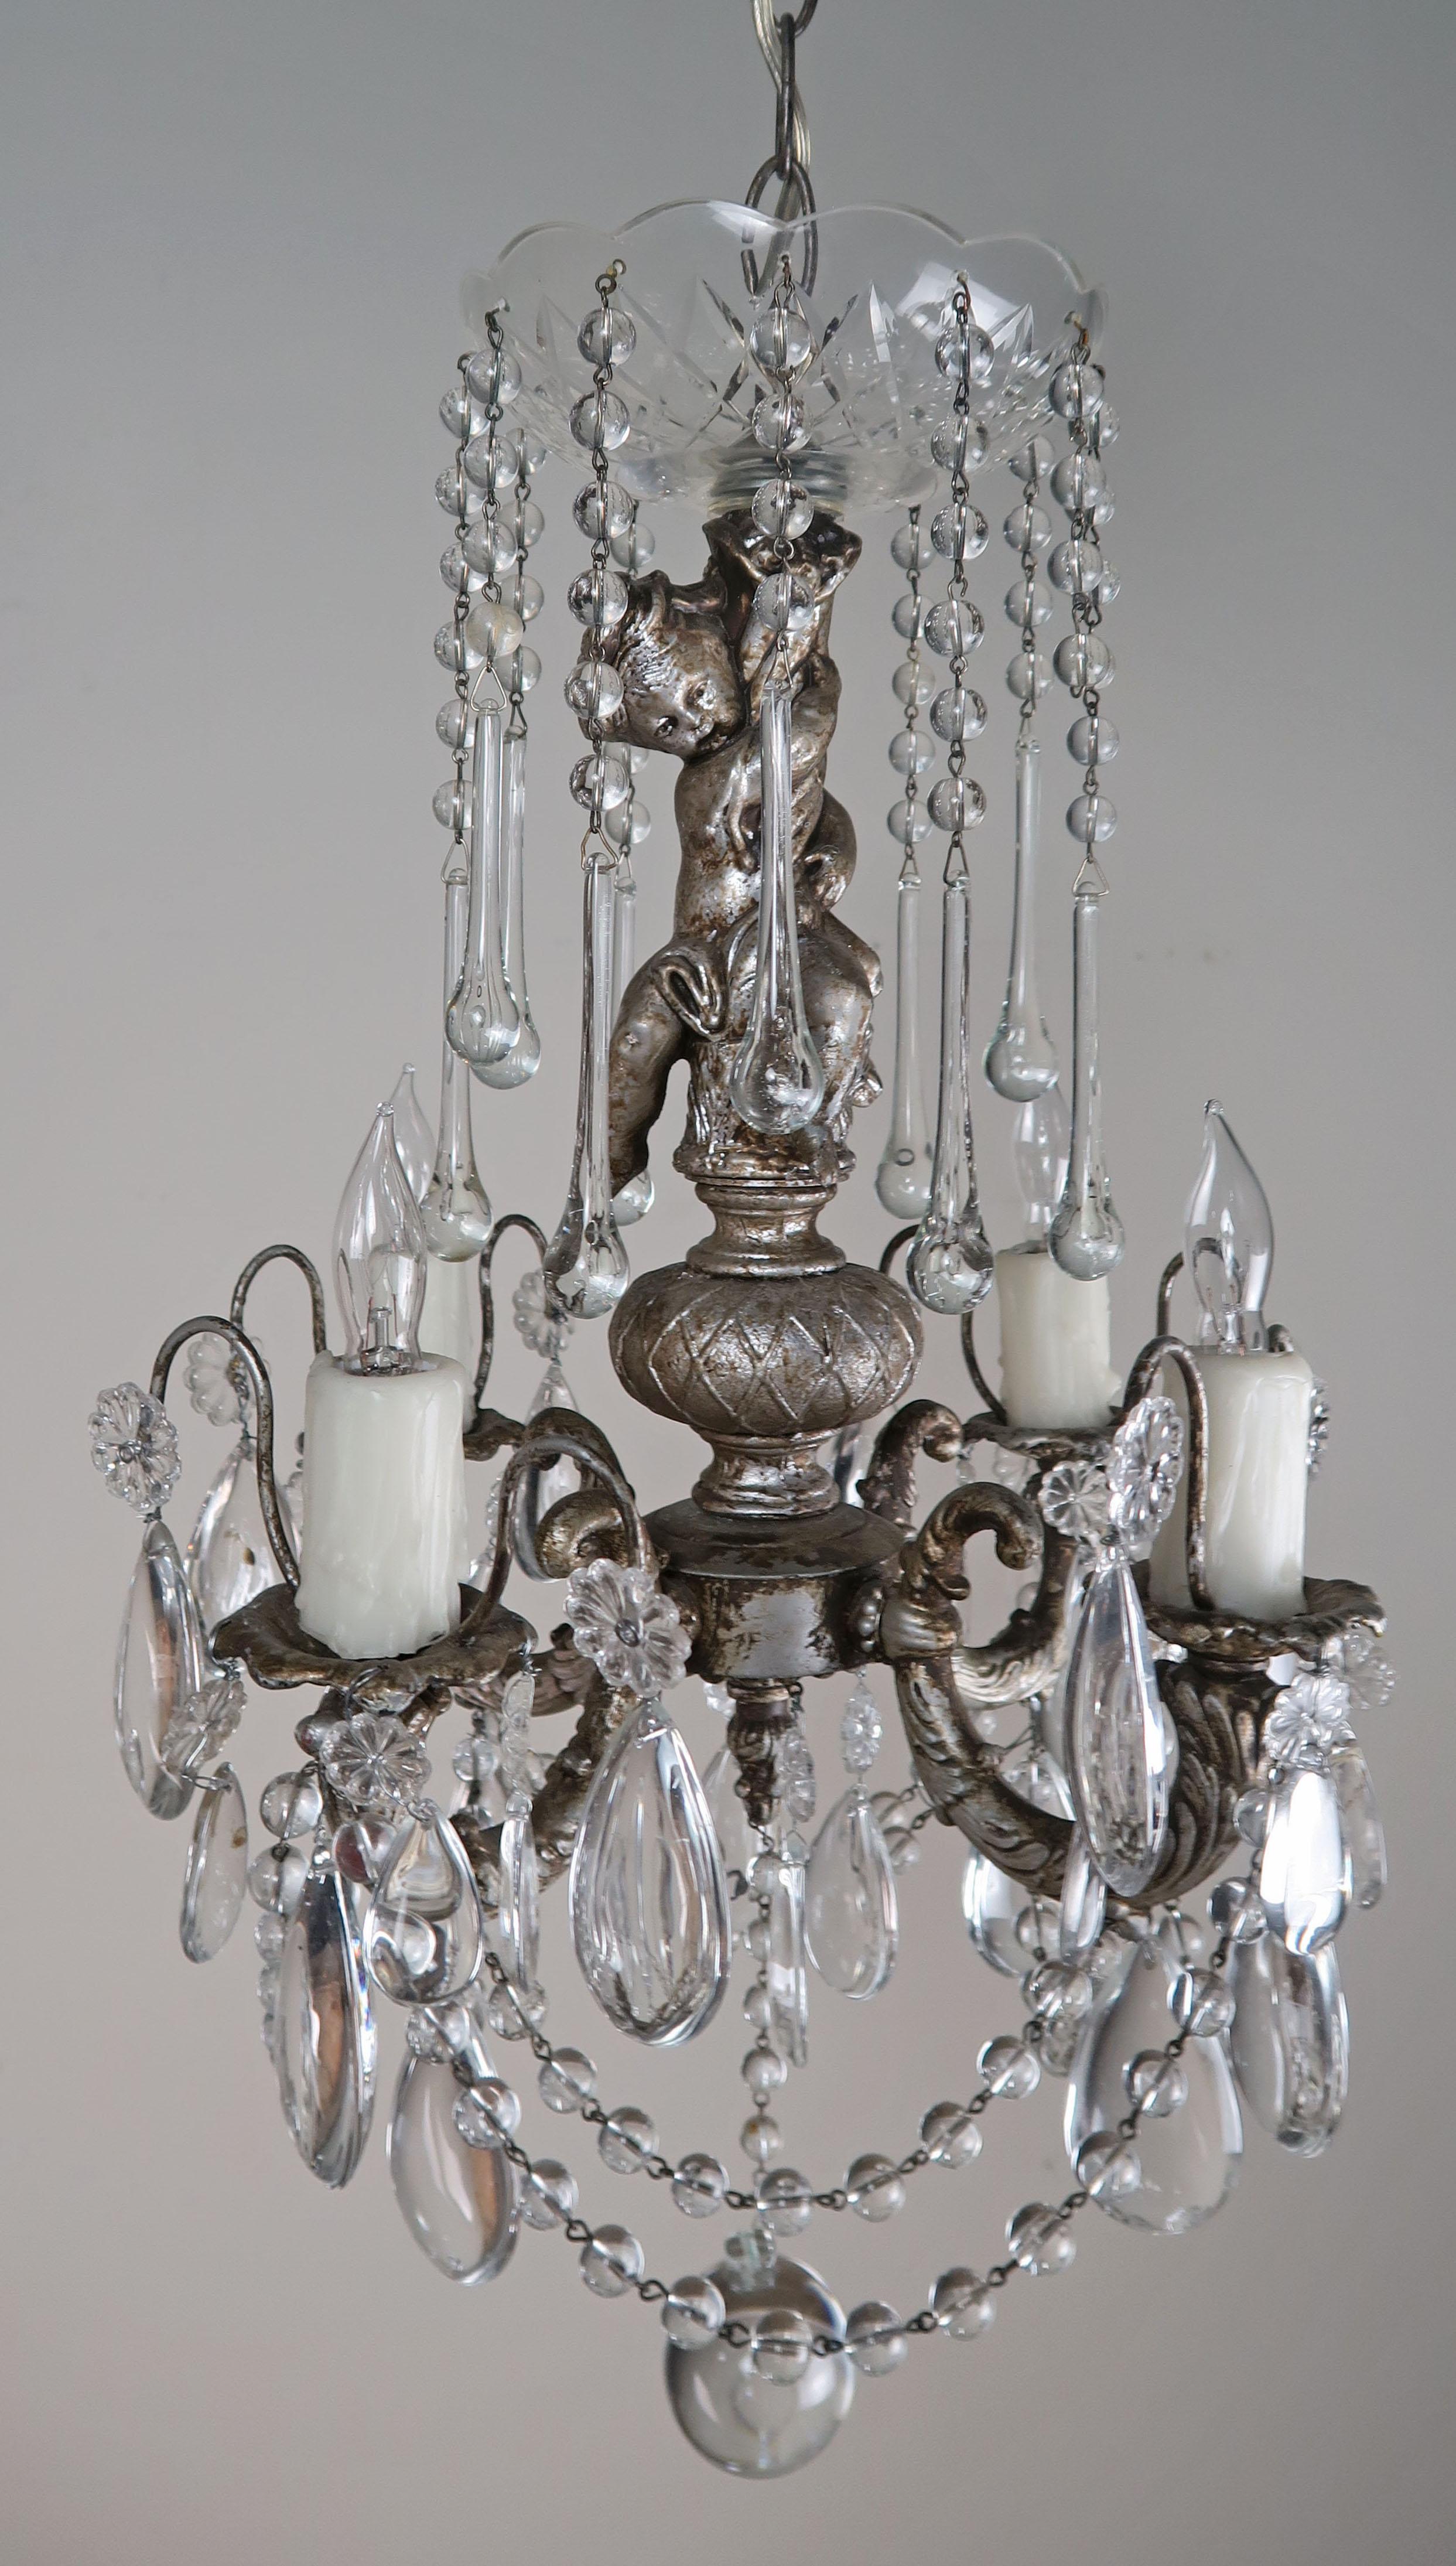 Four-light silvered gilt metal chandelier adorned with crystals and crystal garlands throughout. A charming sweet faced cherub is depicted as part of the column of the chandelier. The fixture is newly rewired with drip wax candle covers. Chain and